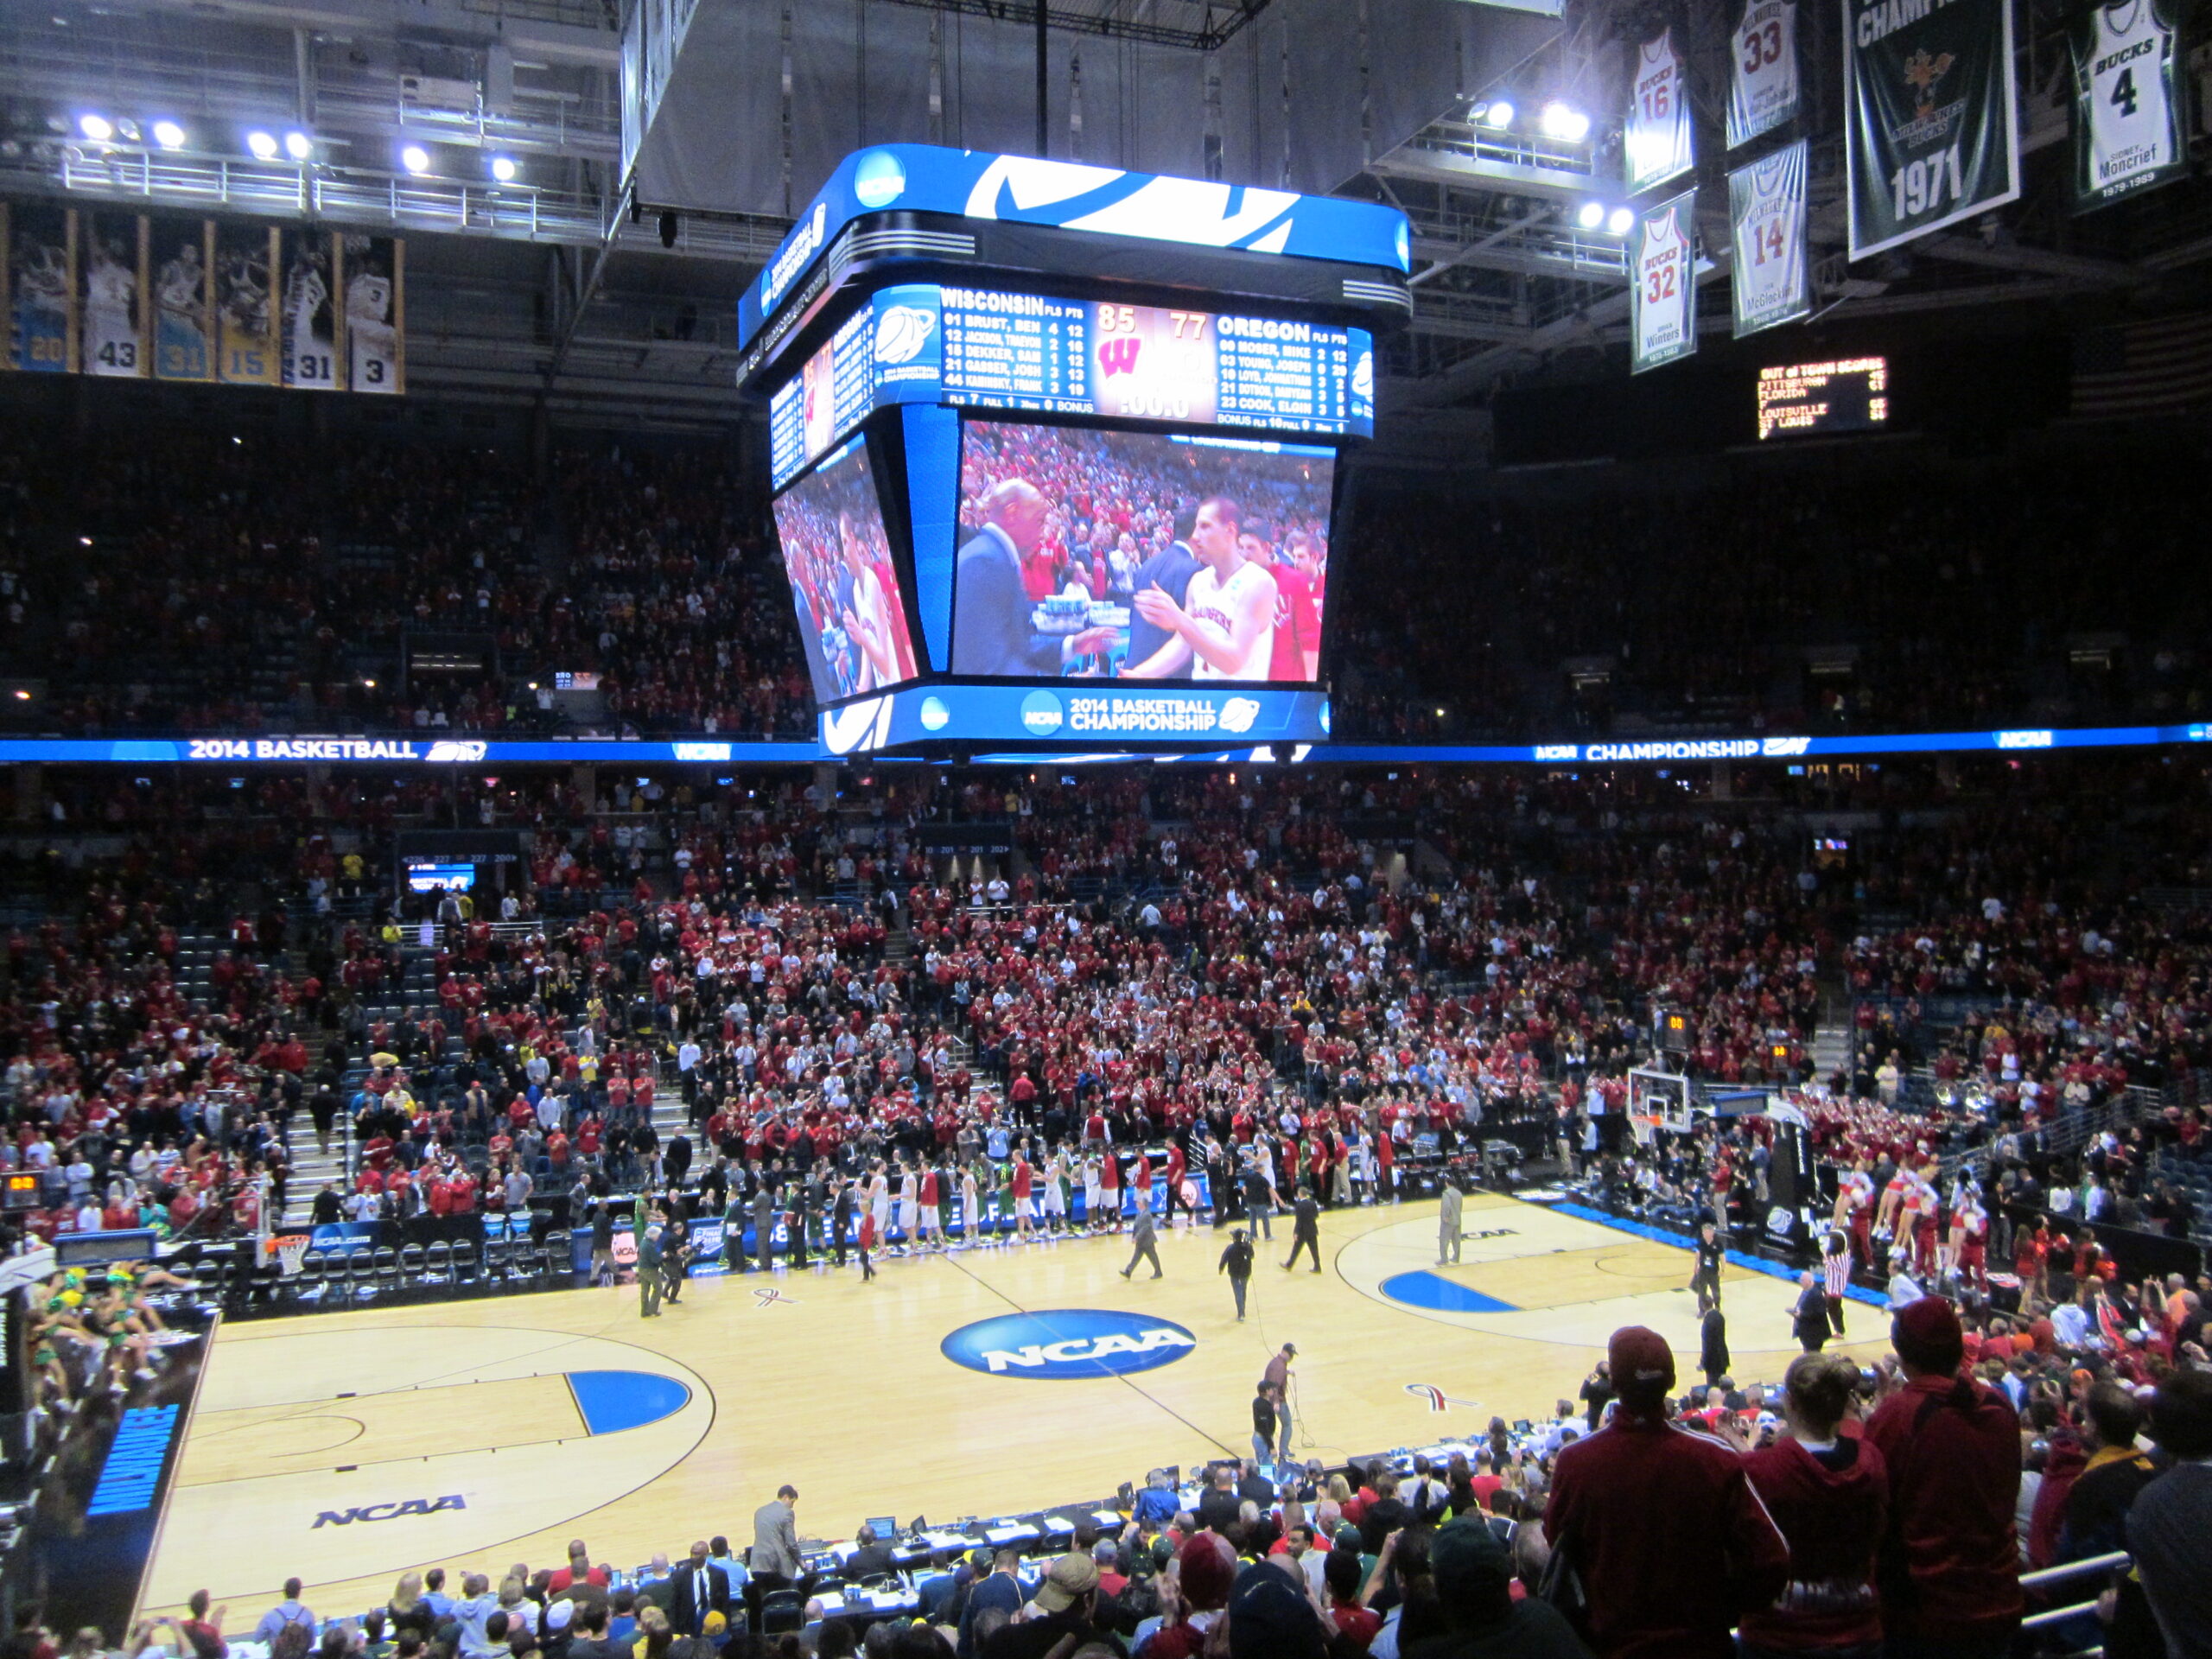 Badgers defeat Oregon to proceed to the next NCAA round in basketball